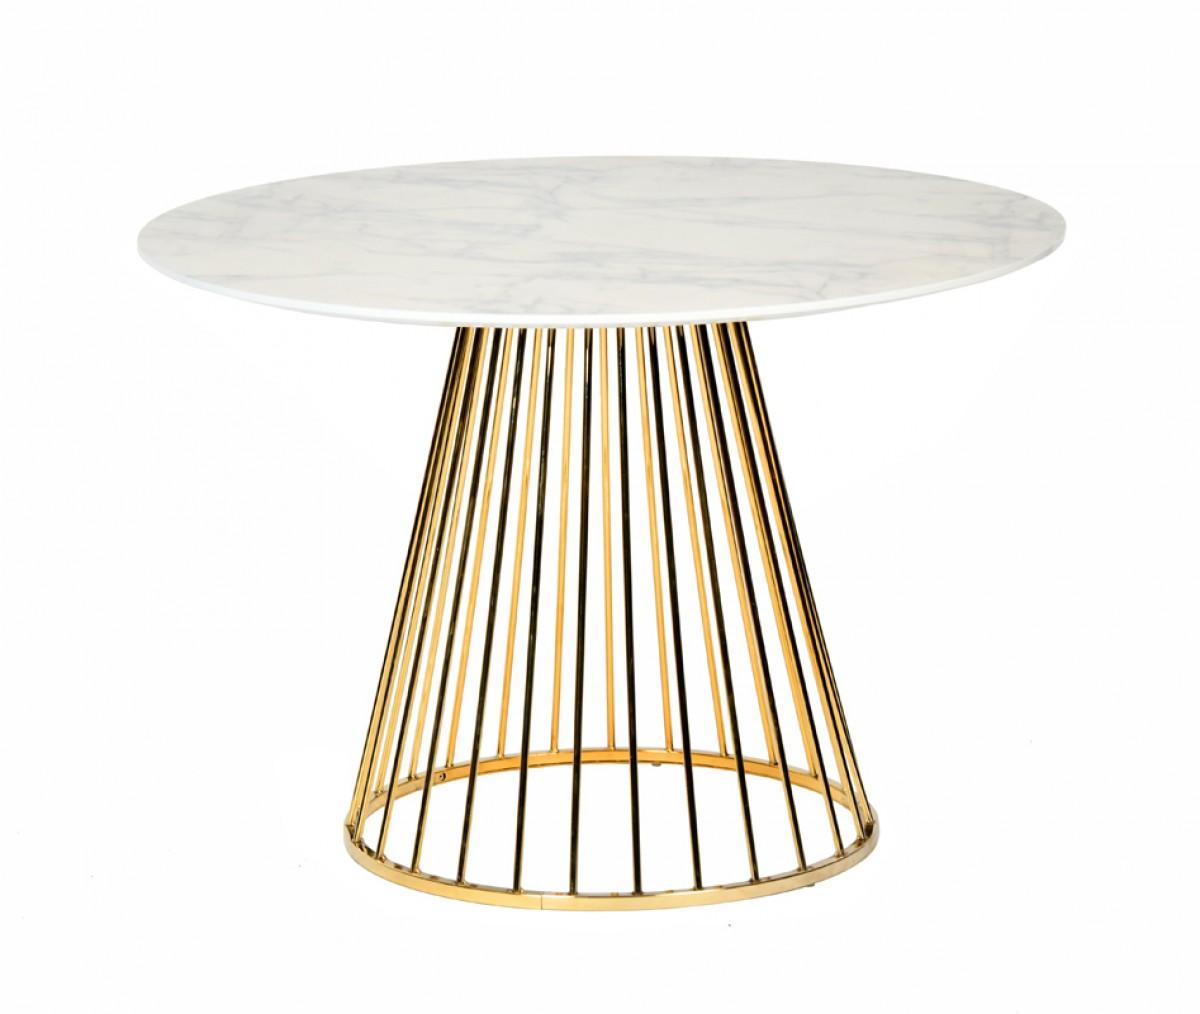 Contemporary, Modern Dining Table Holly VGFH-FDT7012-WHT in White, Gold 